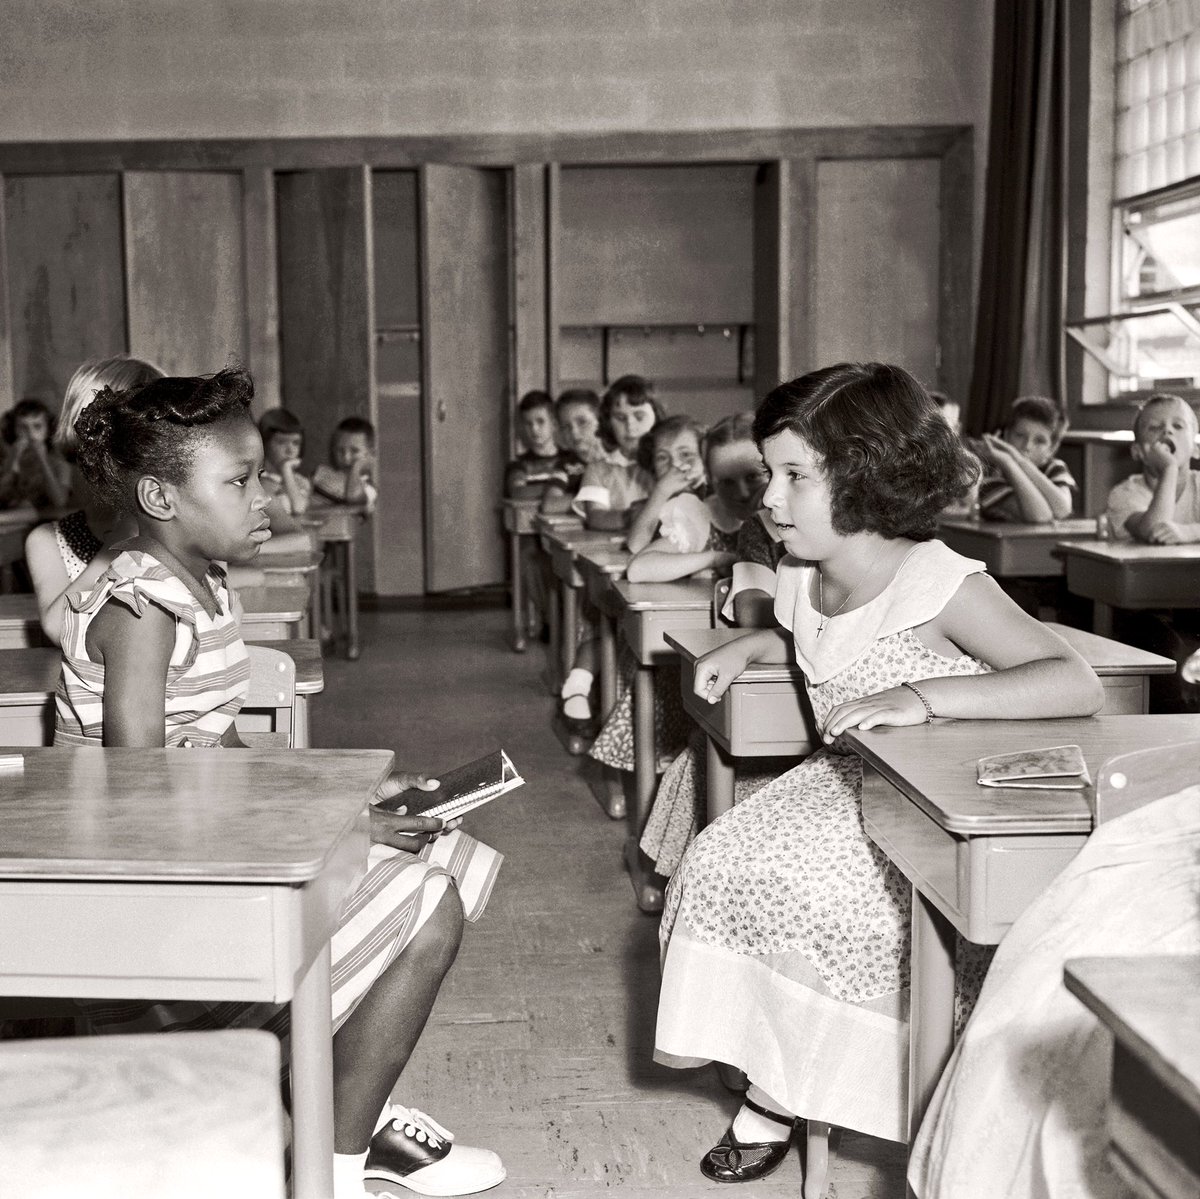 “In 1956, the Supreme Court had recently struck down school segregation in the Brown v. Board of Education case. President Eisenhower had sponsored sweeping civil rights legislation.”